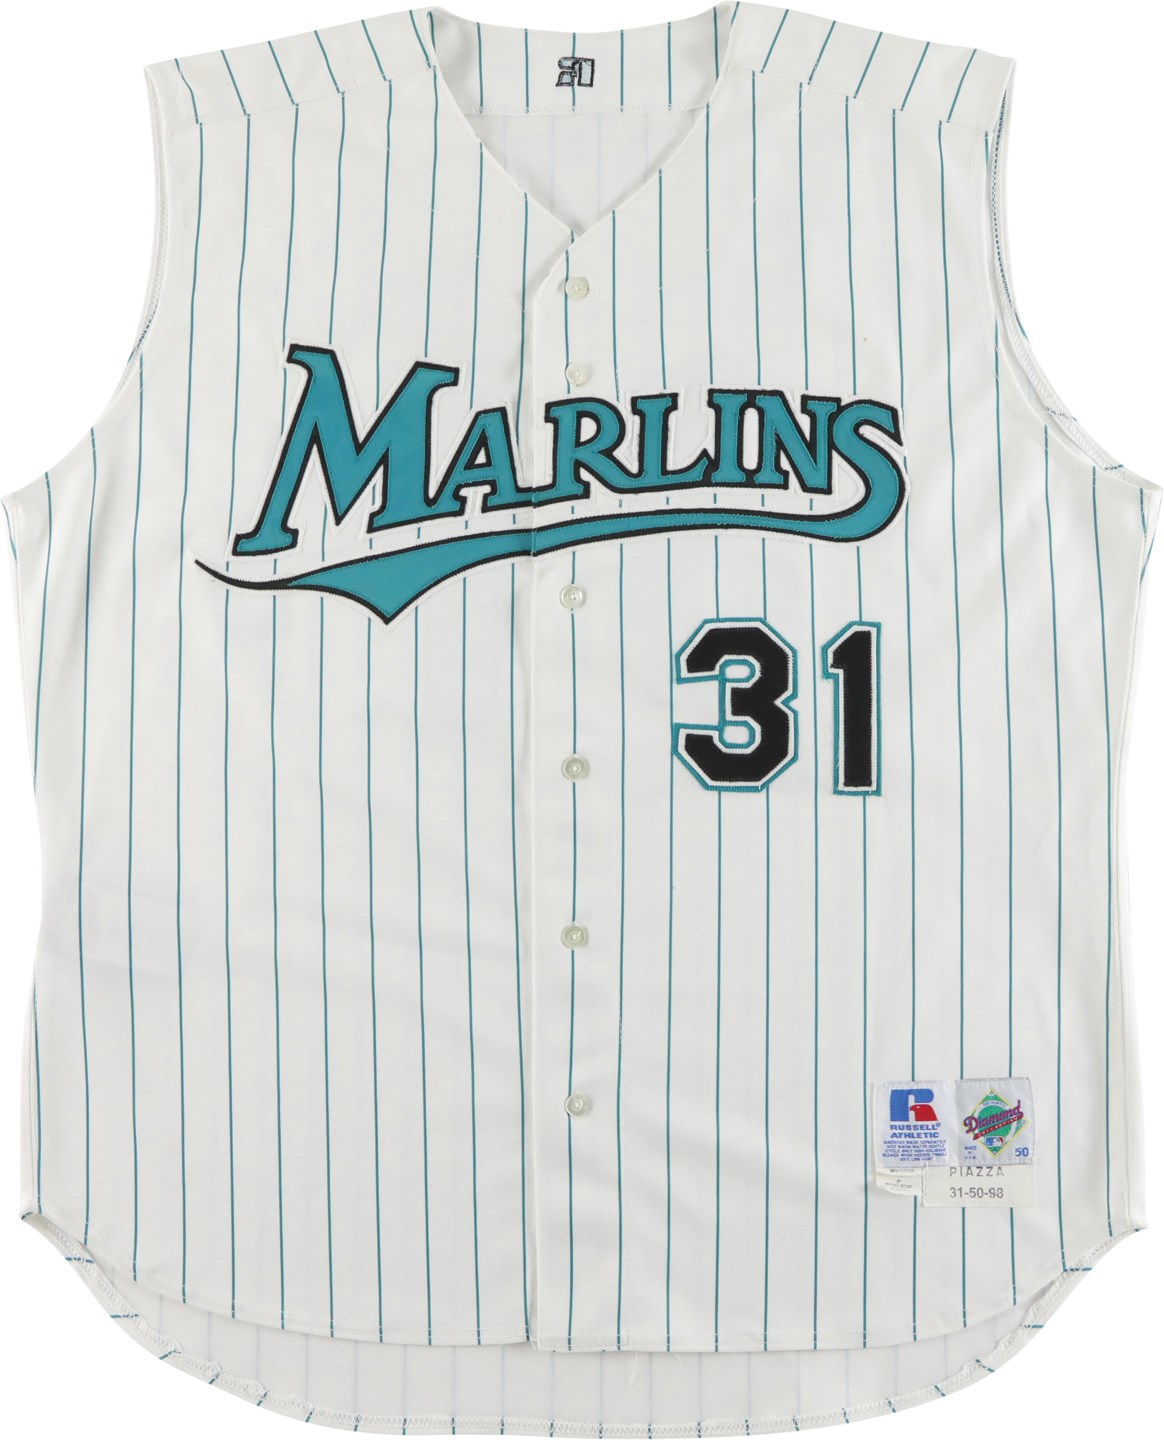 Baseball Equipment - 1998 Mike Piazza Florida Marlins Game Issued Jersey